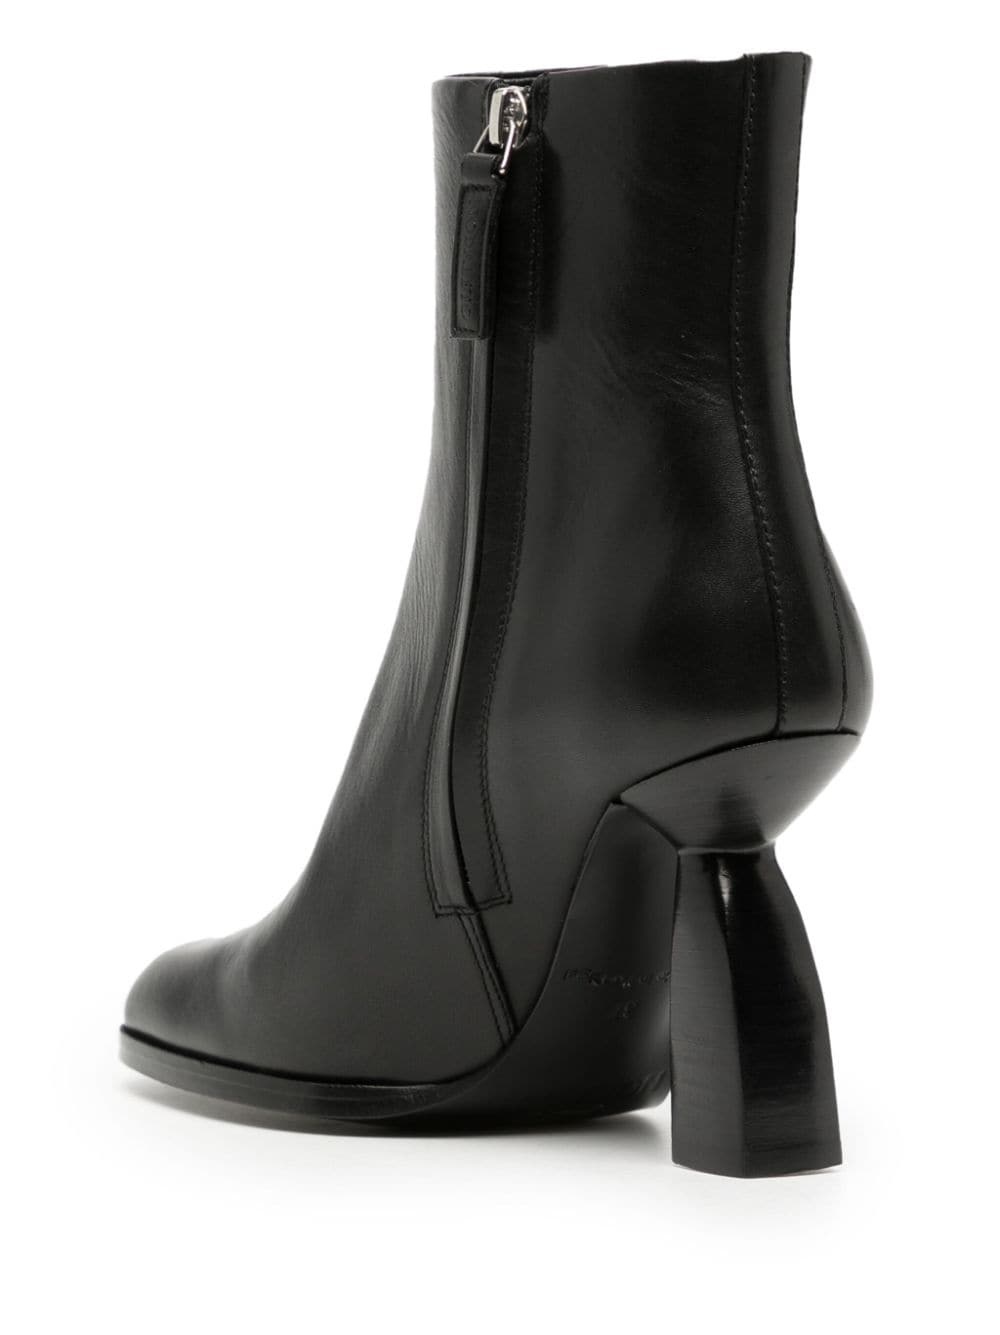 sculpted-heel ankle boots - 3